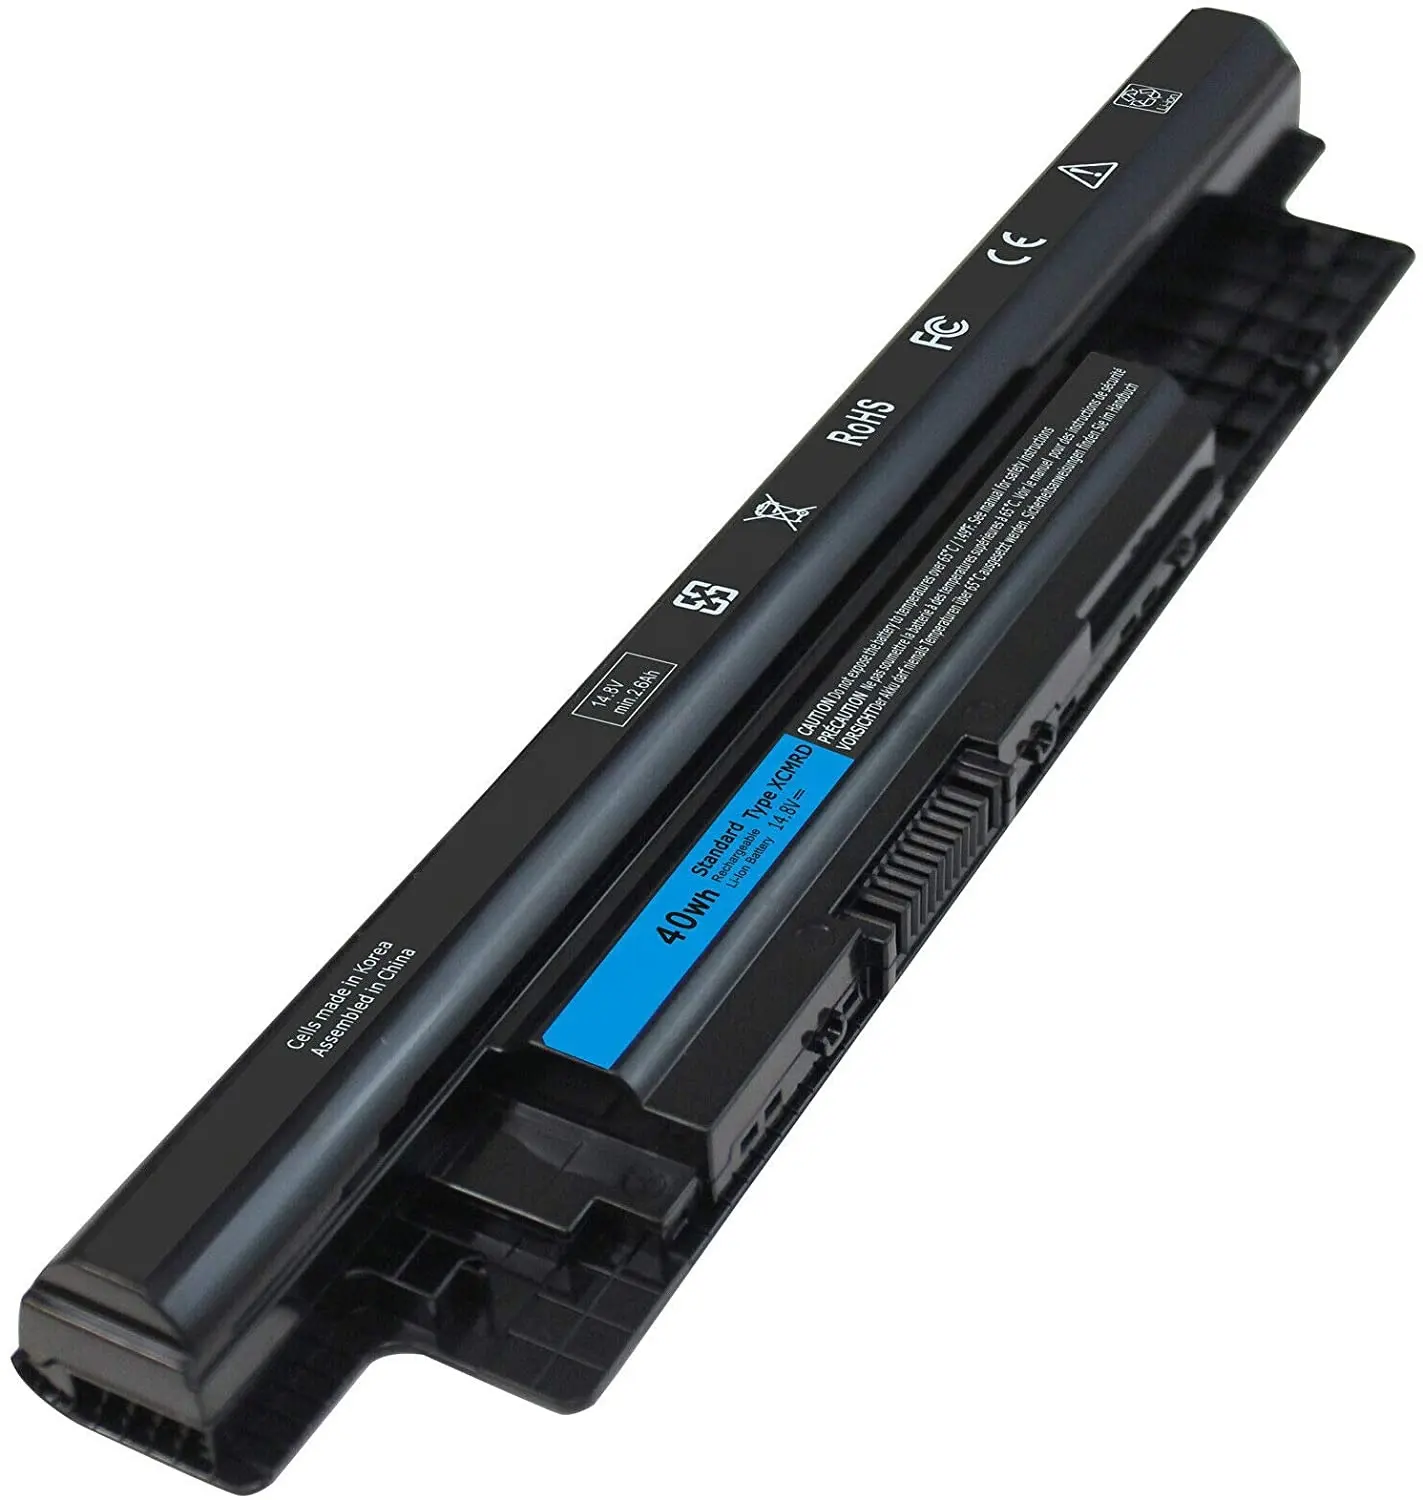 Replacement Laptop Battery DELL Laptop Battery 5421 XCMRD For Dell Inspiron 14 14R 15 15R 17 17R VOSTRO2421 VOSTRO2521 Xcmrd40wh 14.8v Battery Laptop